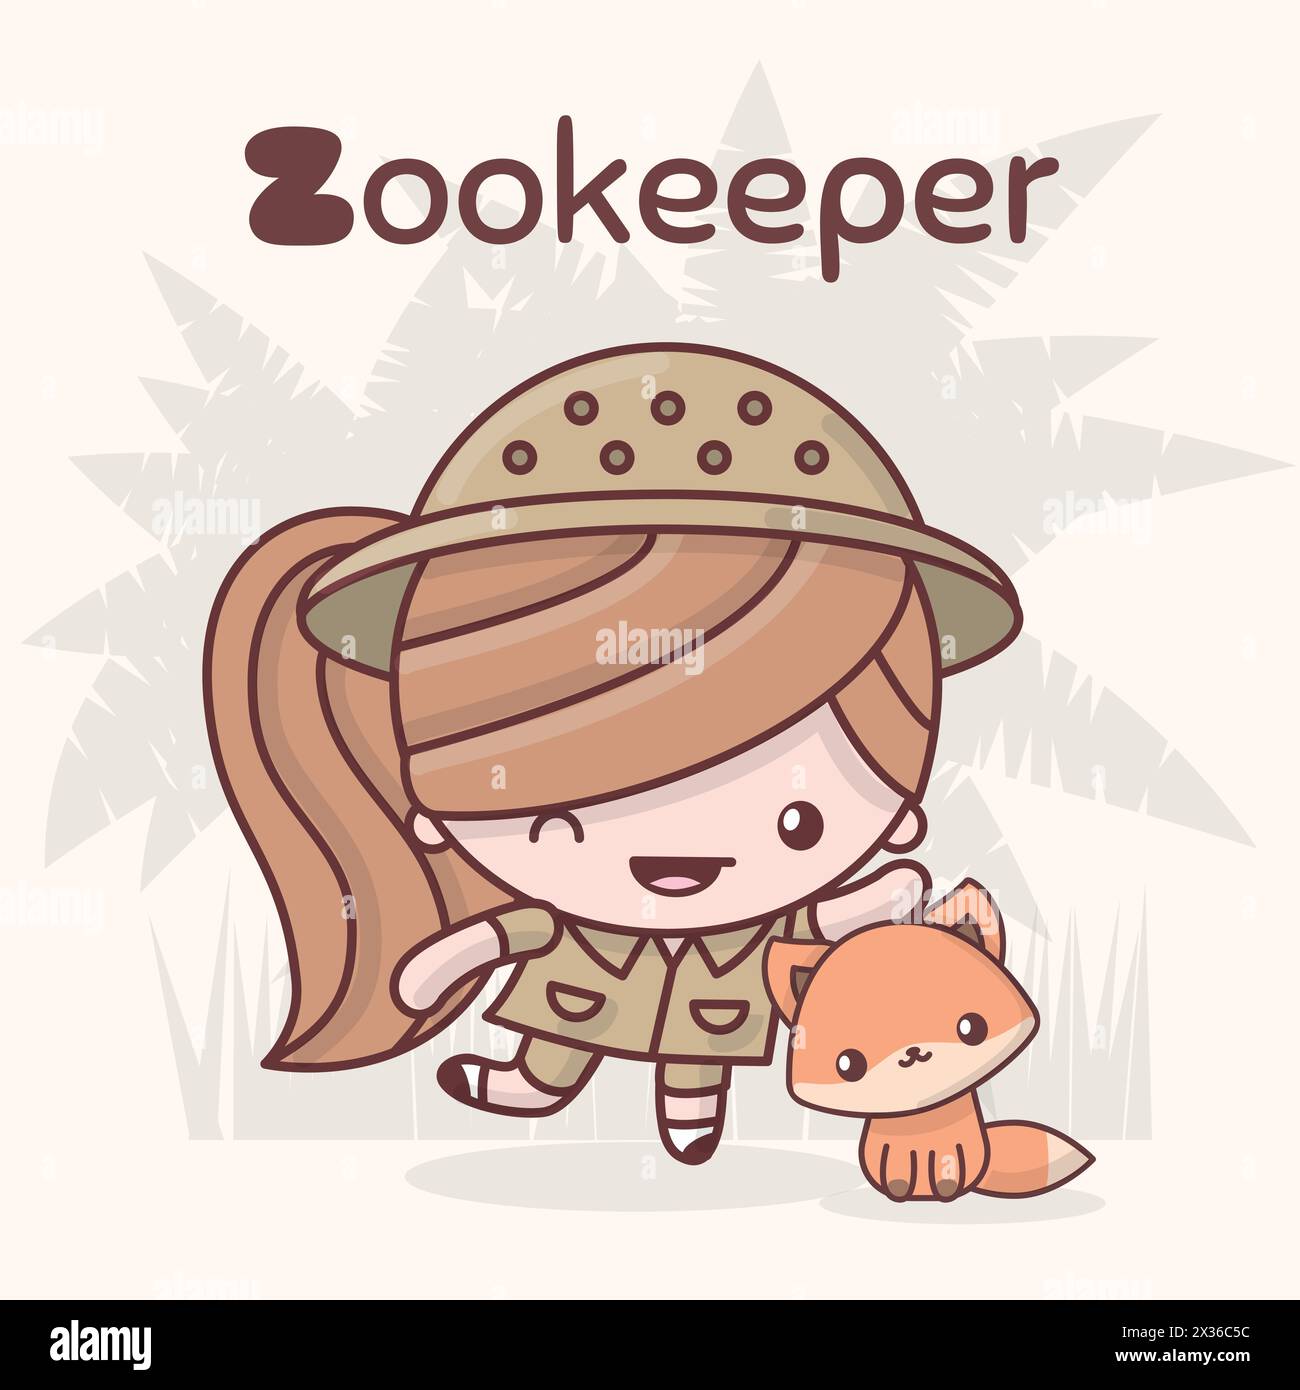 Cute chibi kawaii characters. Alphabet professions. Letter Z - Zookeeper. Flat style Stock Vector